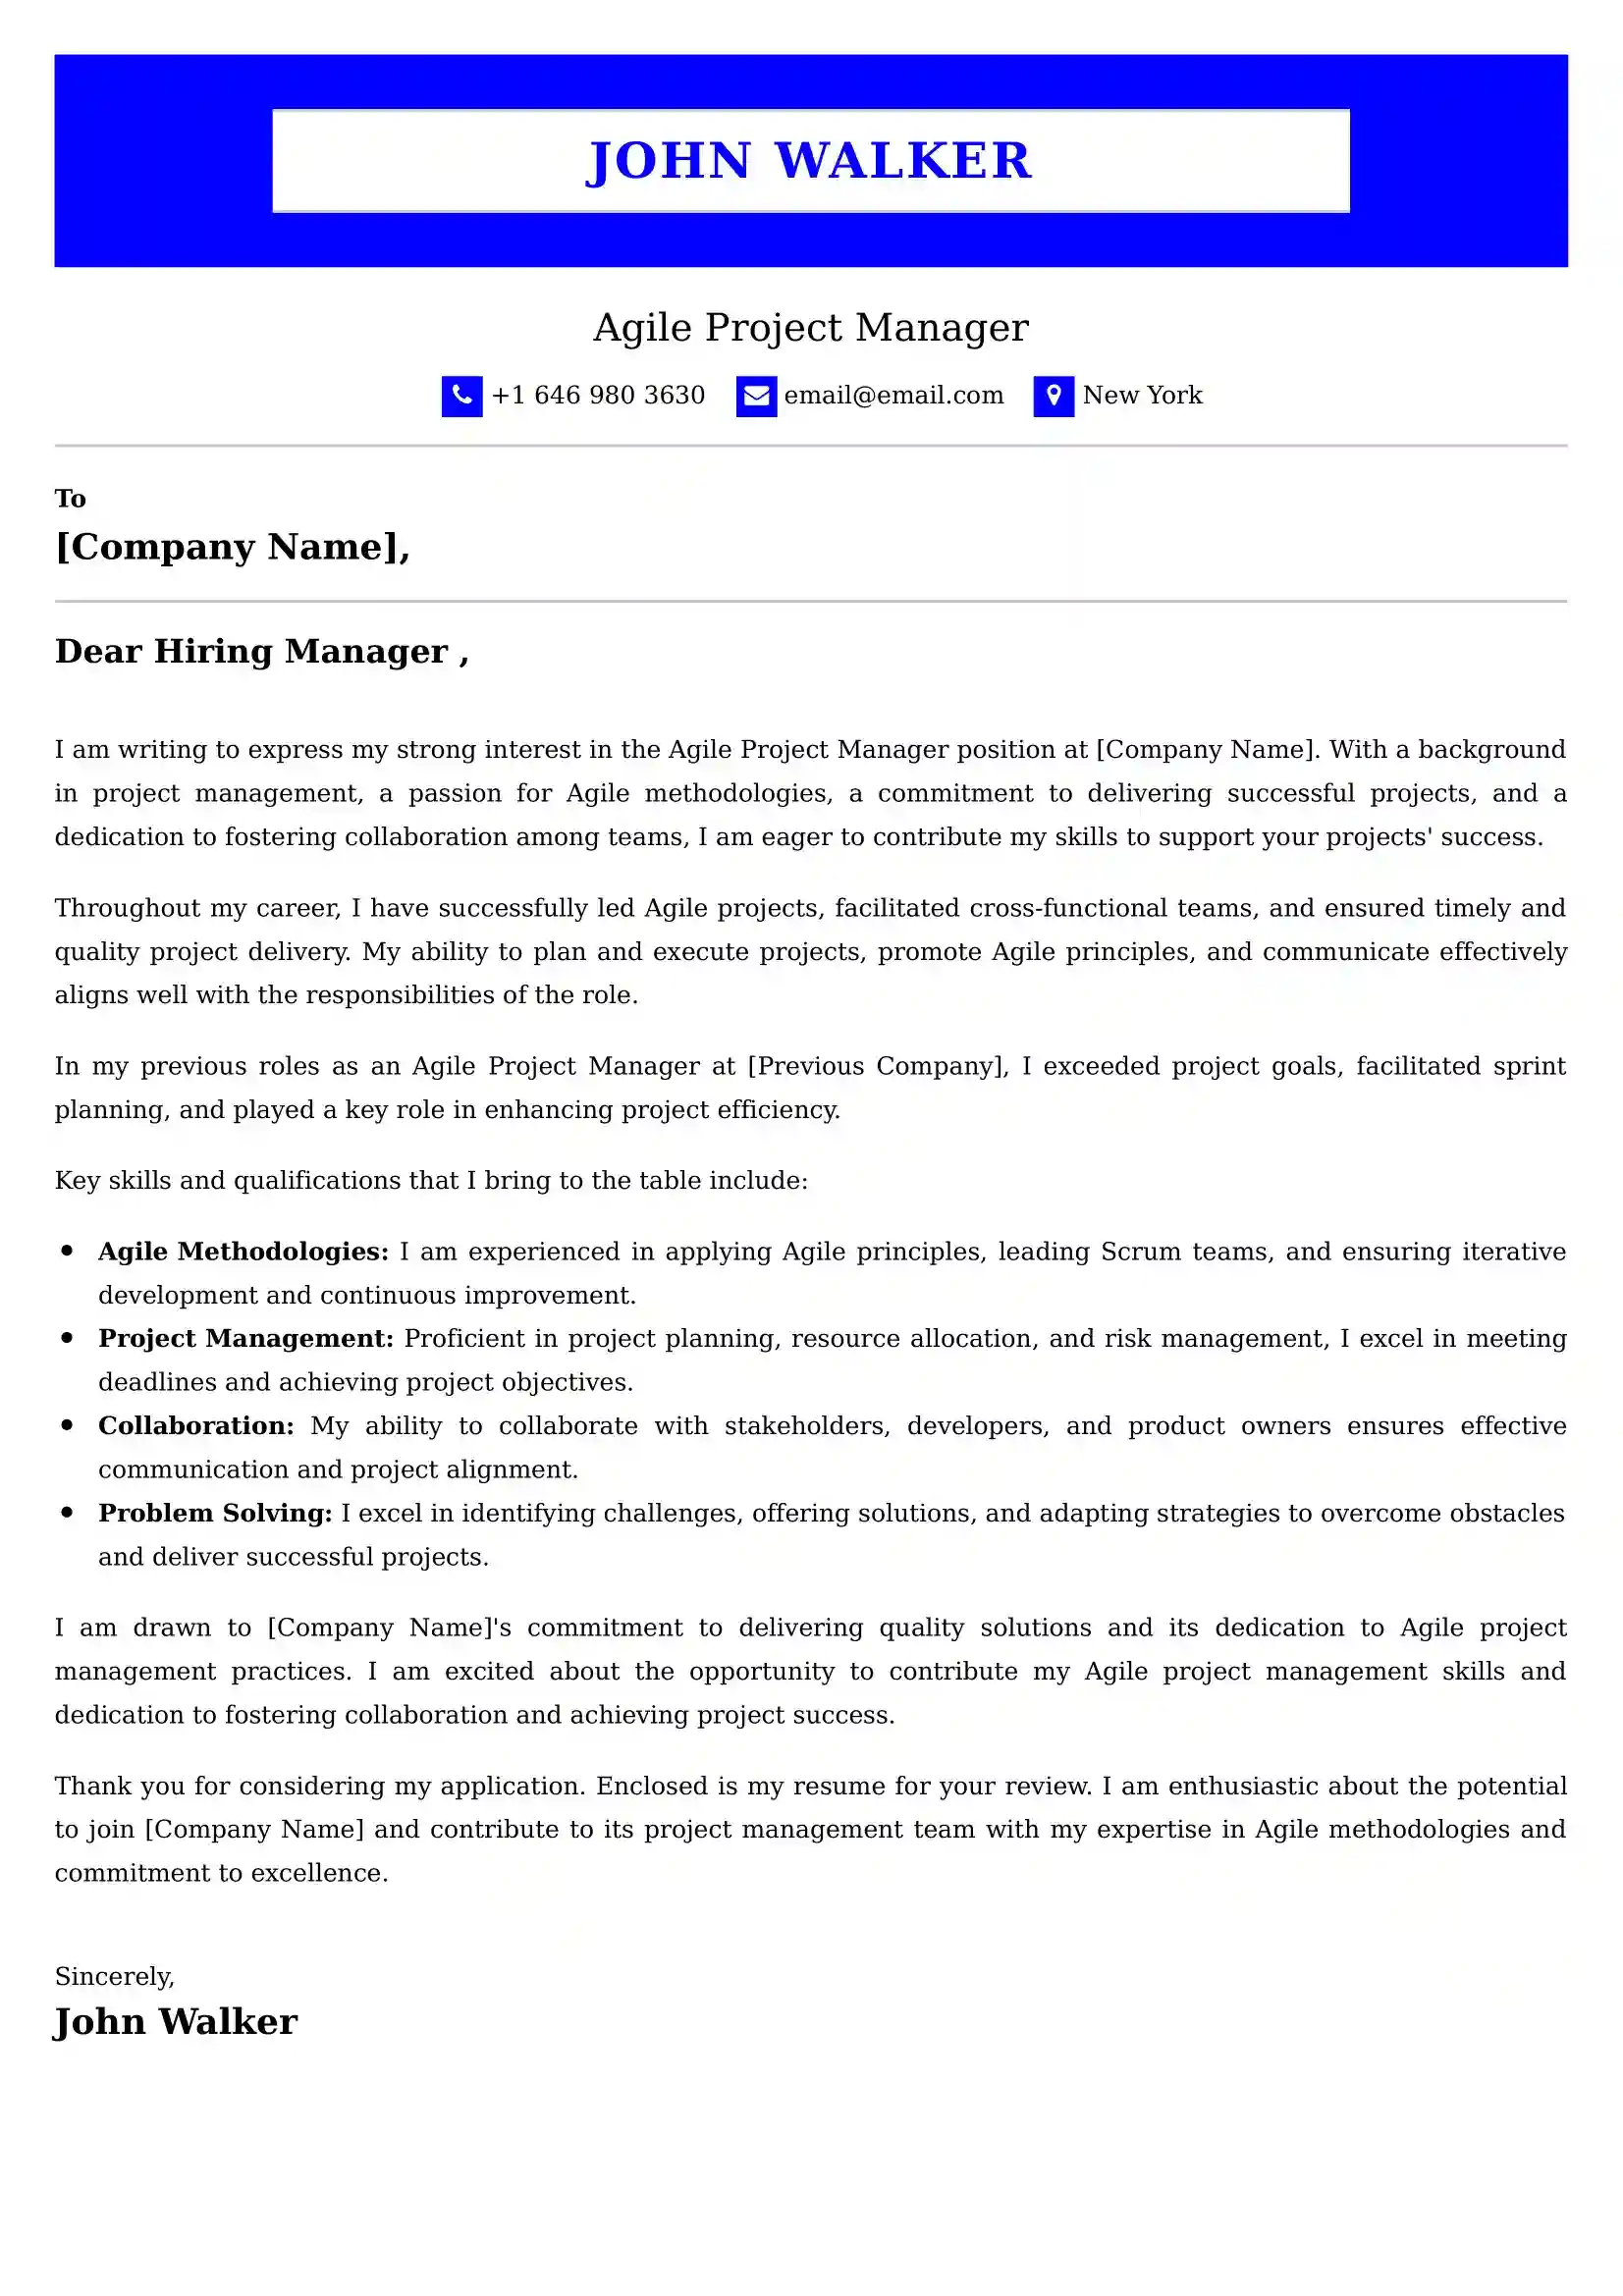 Agile Project Manager Cover Letter Examples Australia